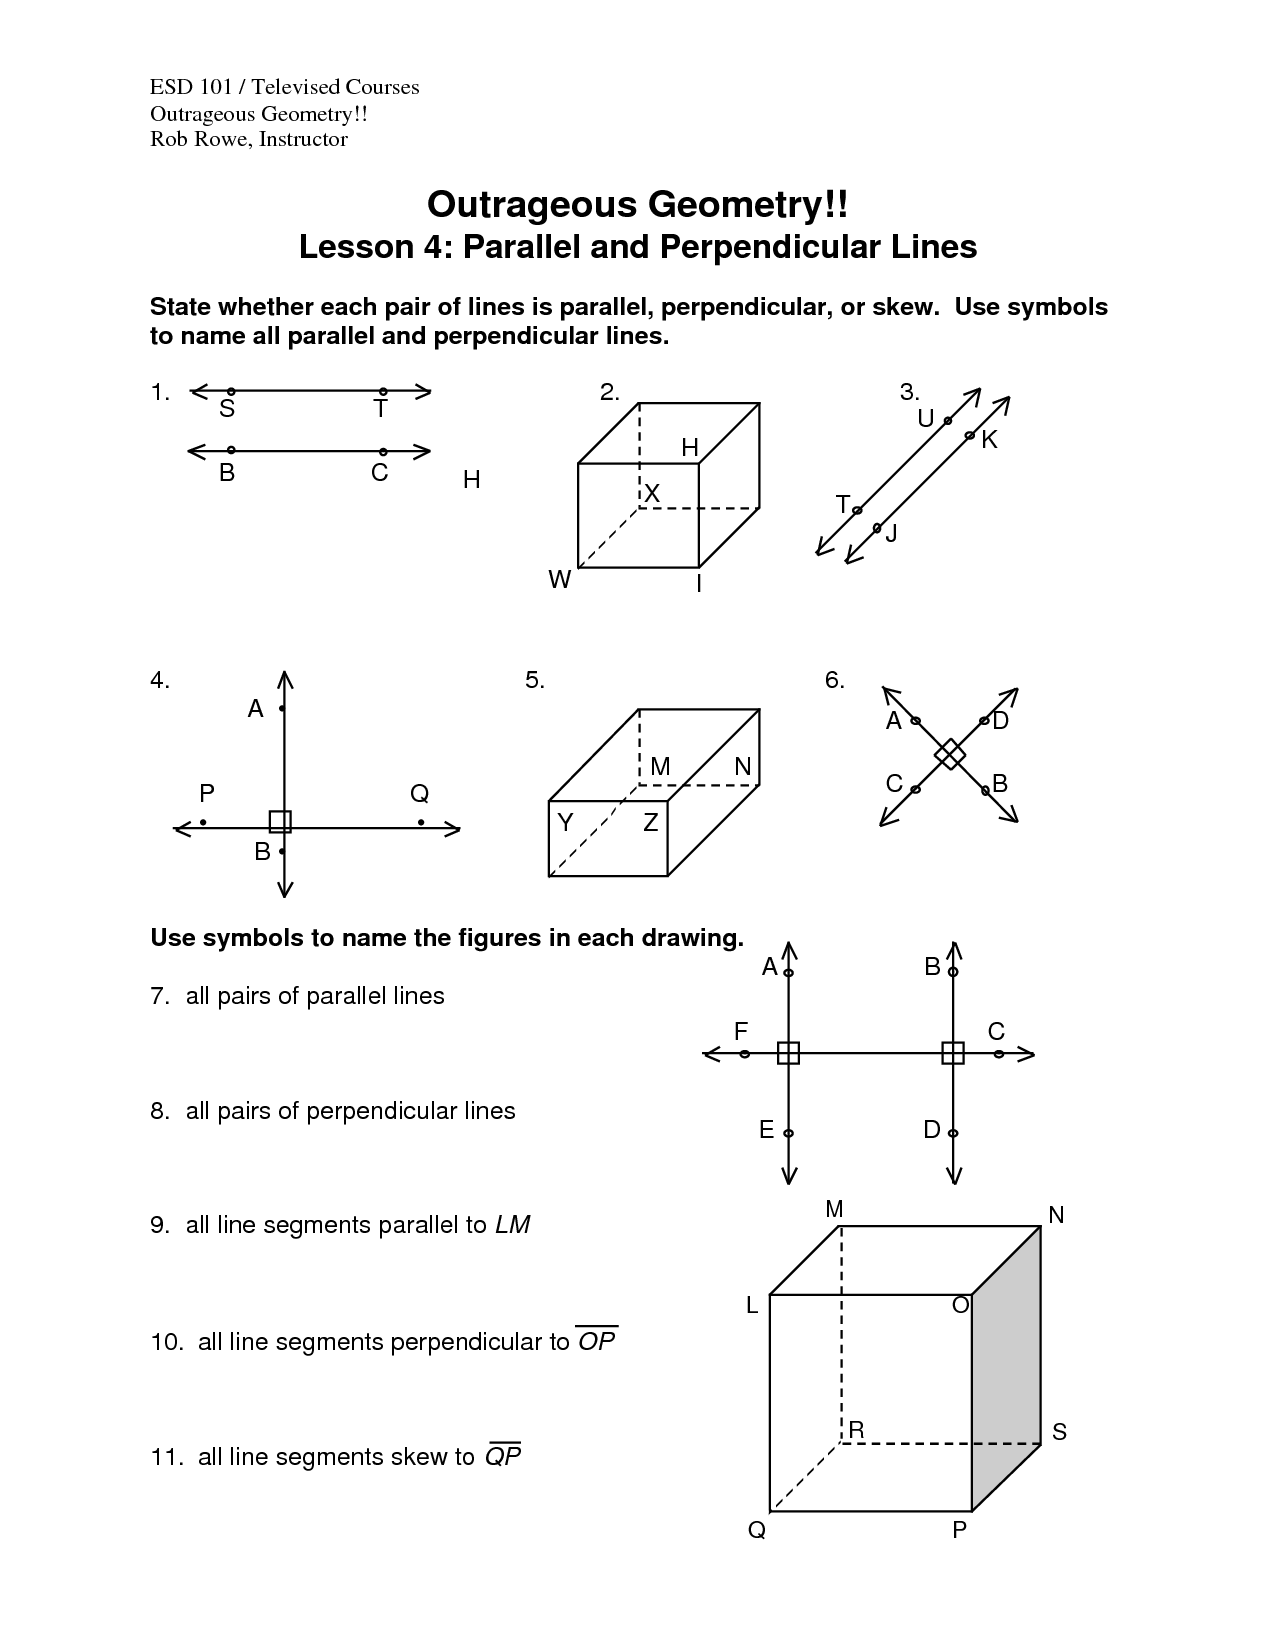 classifying-equations-of-parallel-and-perpendicular-lines-answer-key-tessshebaylo